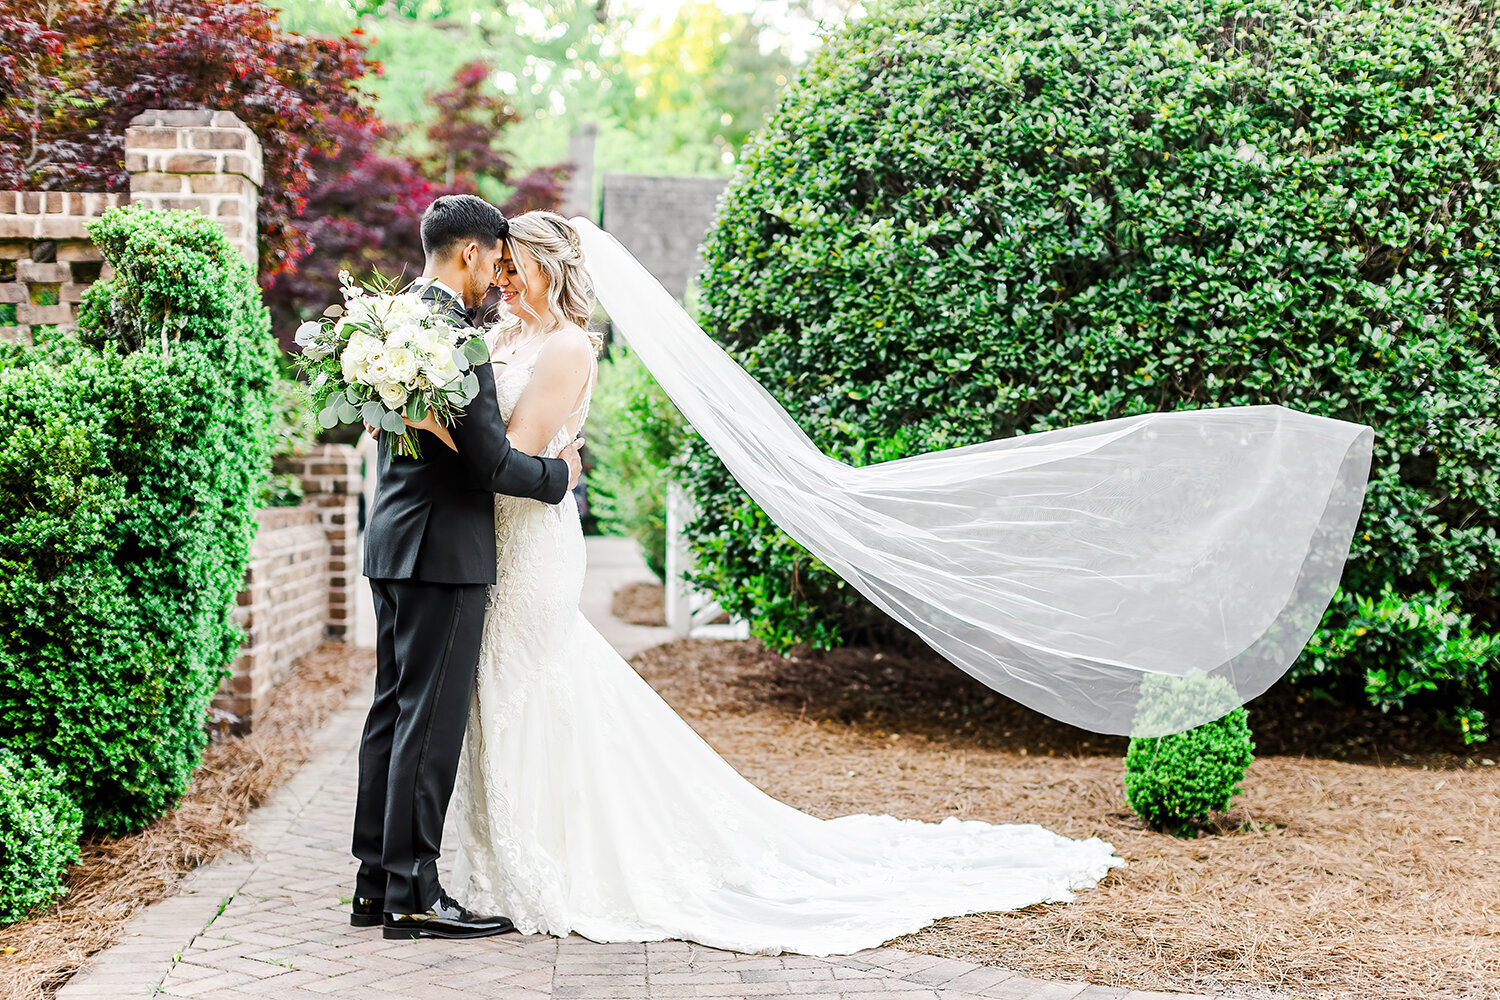 A wedding at the Sutherland captured by Raleigh wedding photographer Tierney Riggs